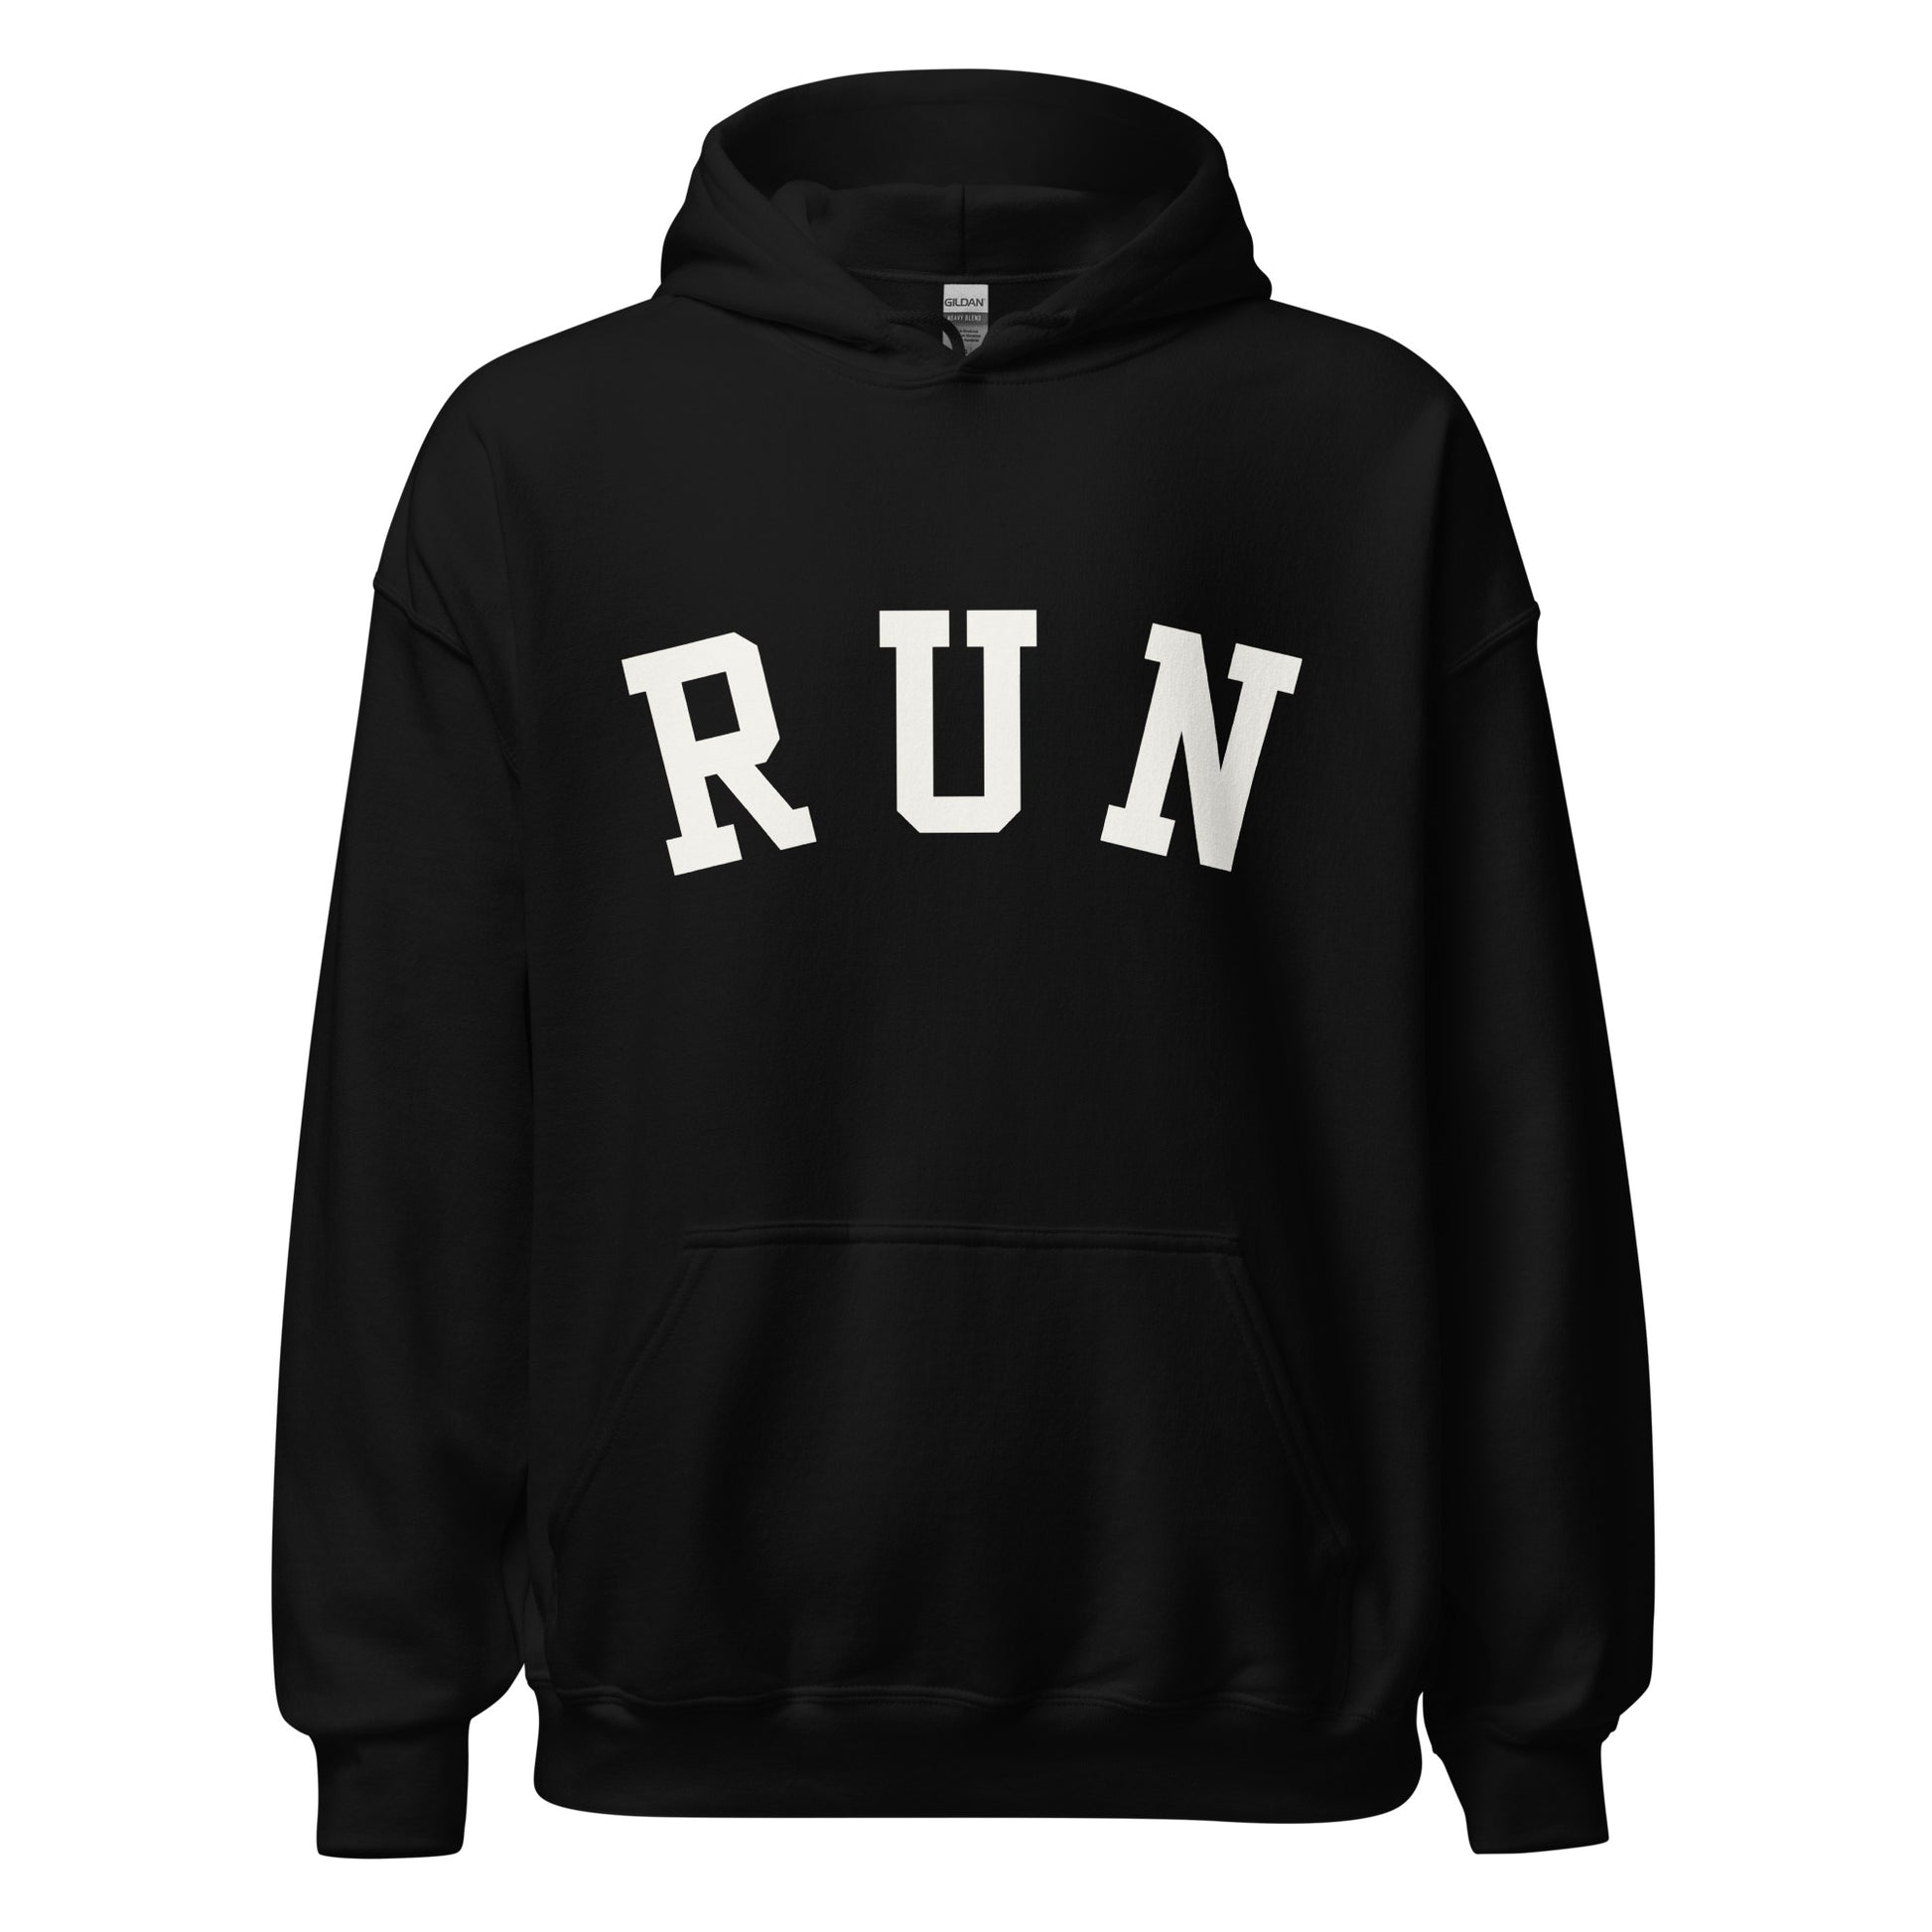 black unisex hoodie with the word run across the chest in a white bold varsity style font